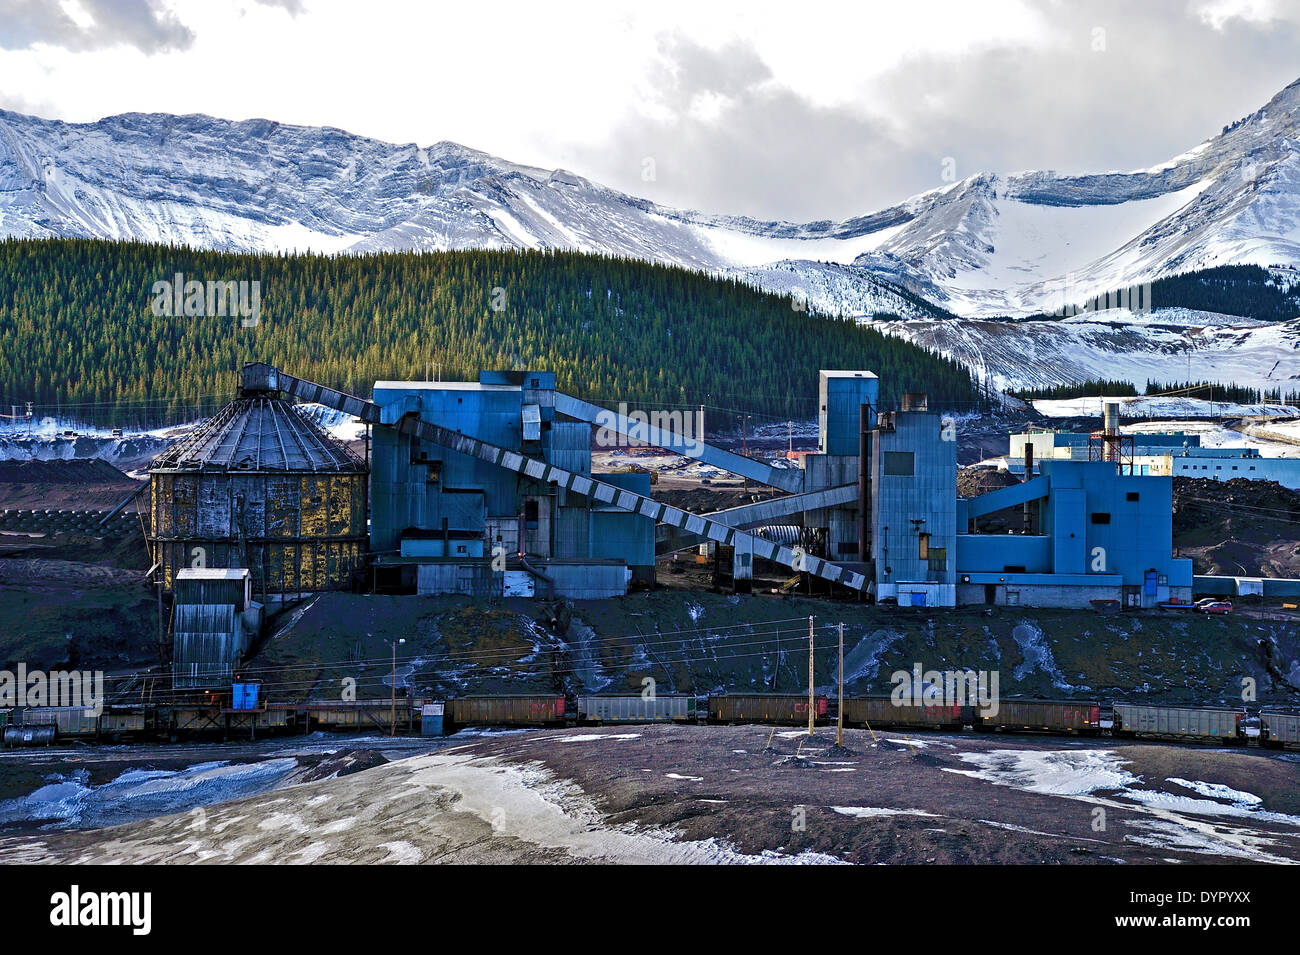 A coal processing plant in the foothills of the rocky mountains of Alberta Canada Stock Photo